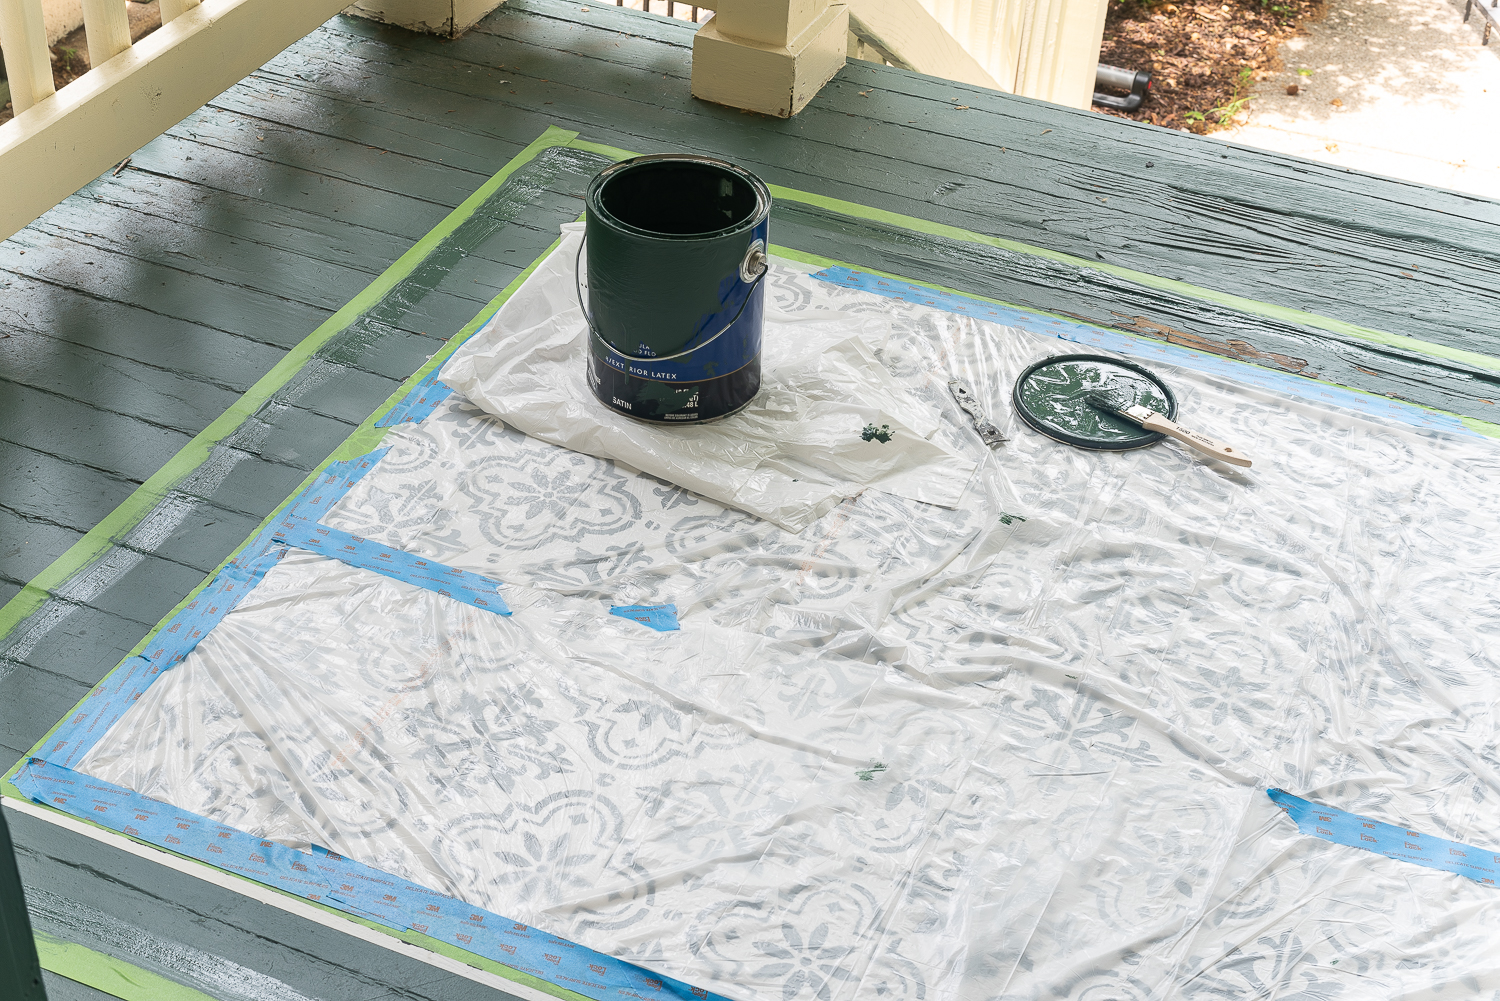 How to stencil a rug on your front porch with chalk paint. Chalk paint stencil how to. Painting rug on porch landing.